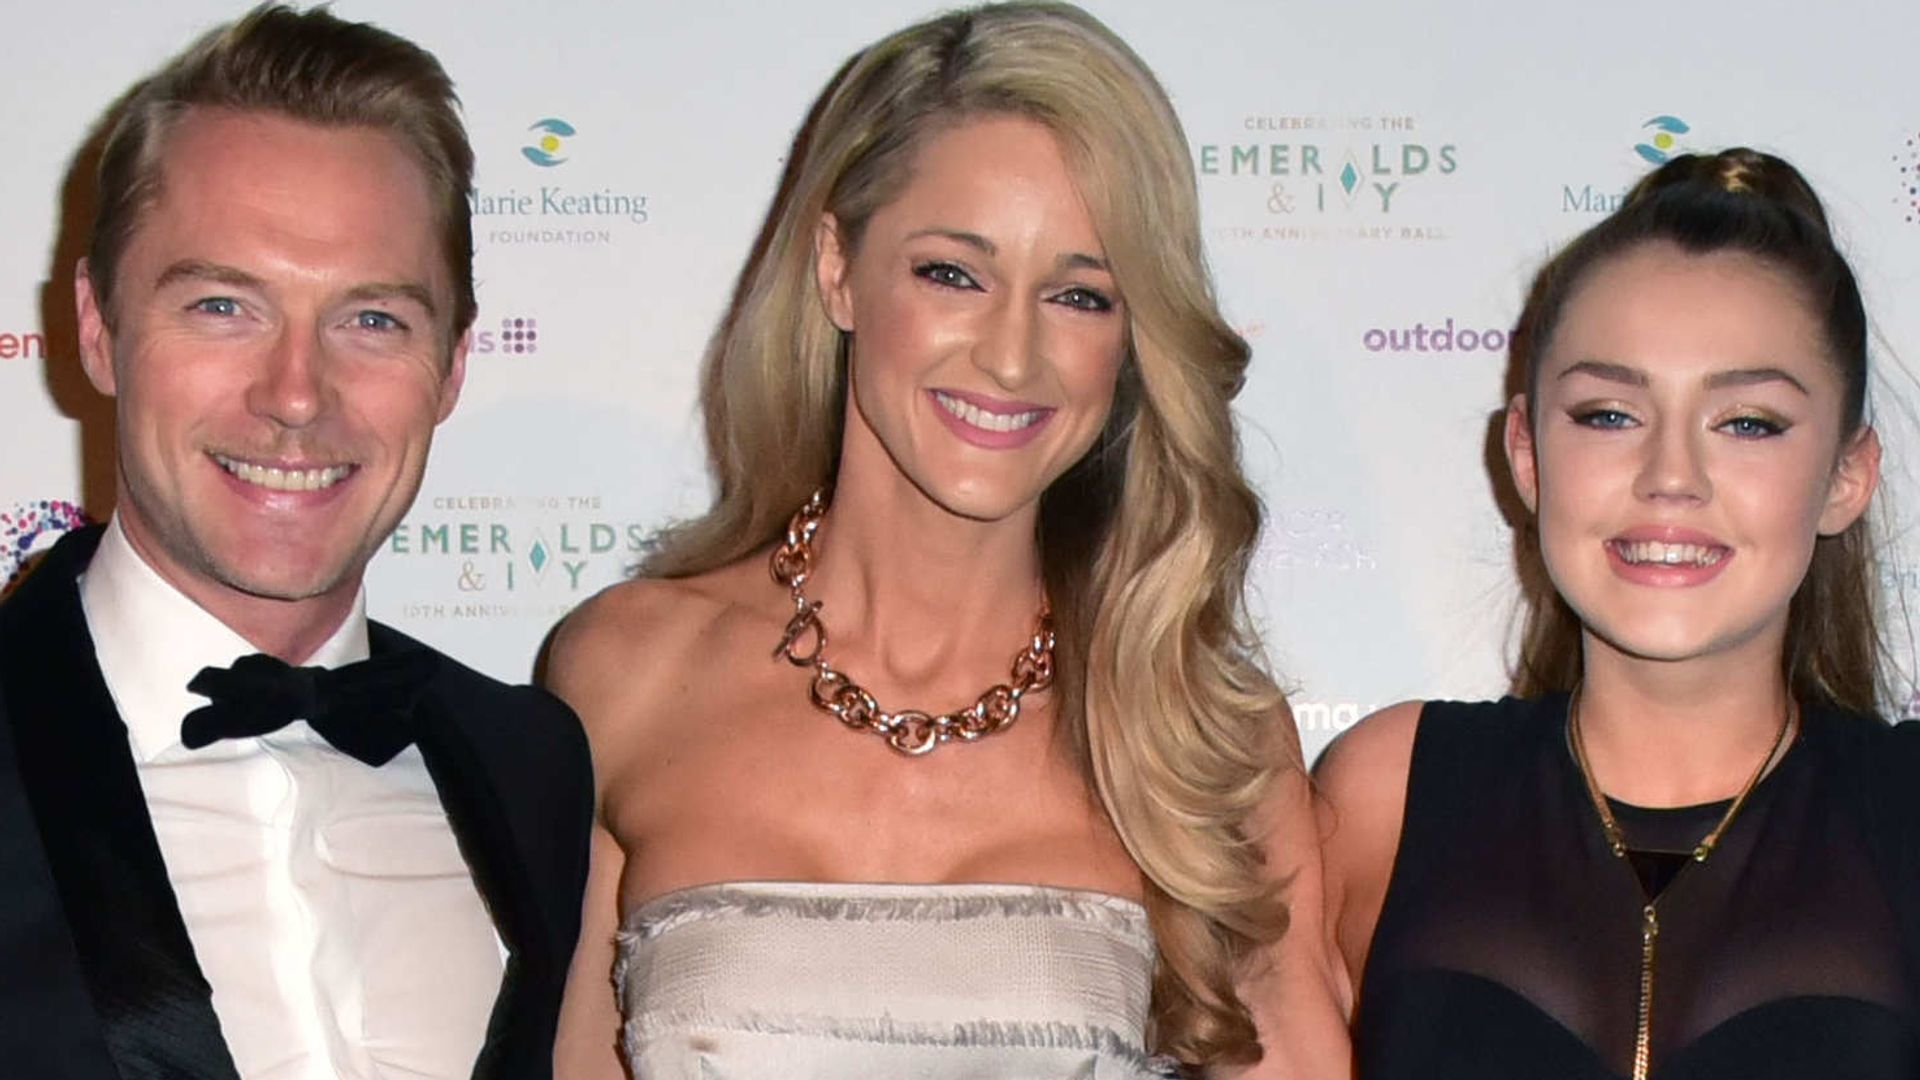 Ronan Keating in a suit with Storm Keating and Missy Keating